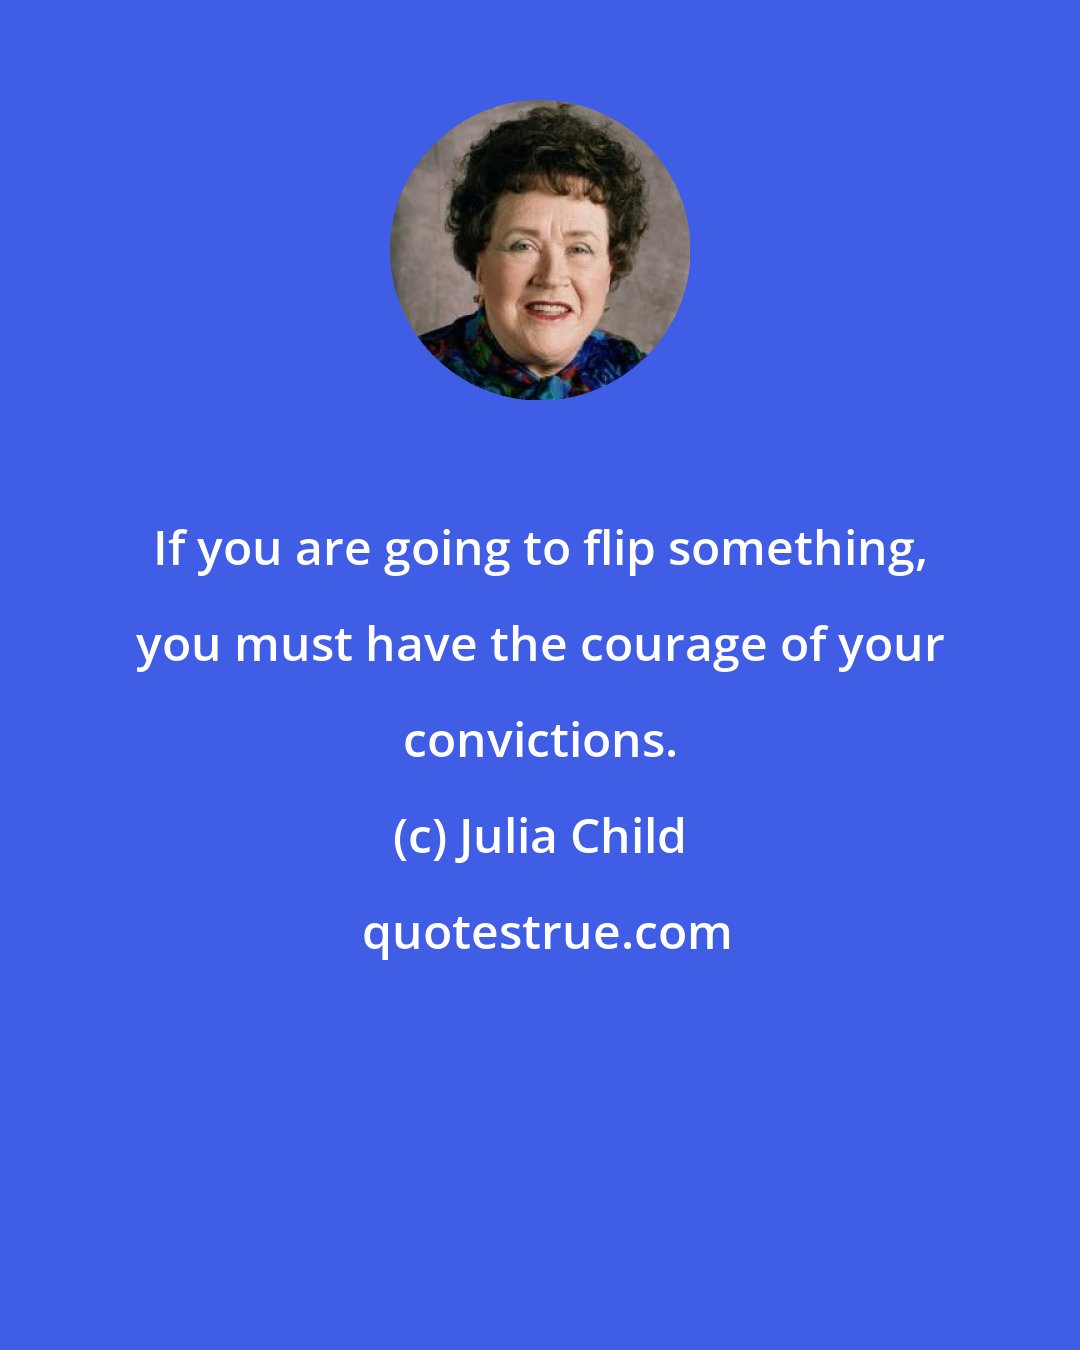 Julia Child: If you are going to flip something, you must have the courage of your convictions.